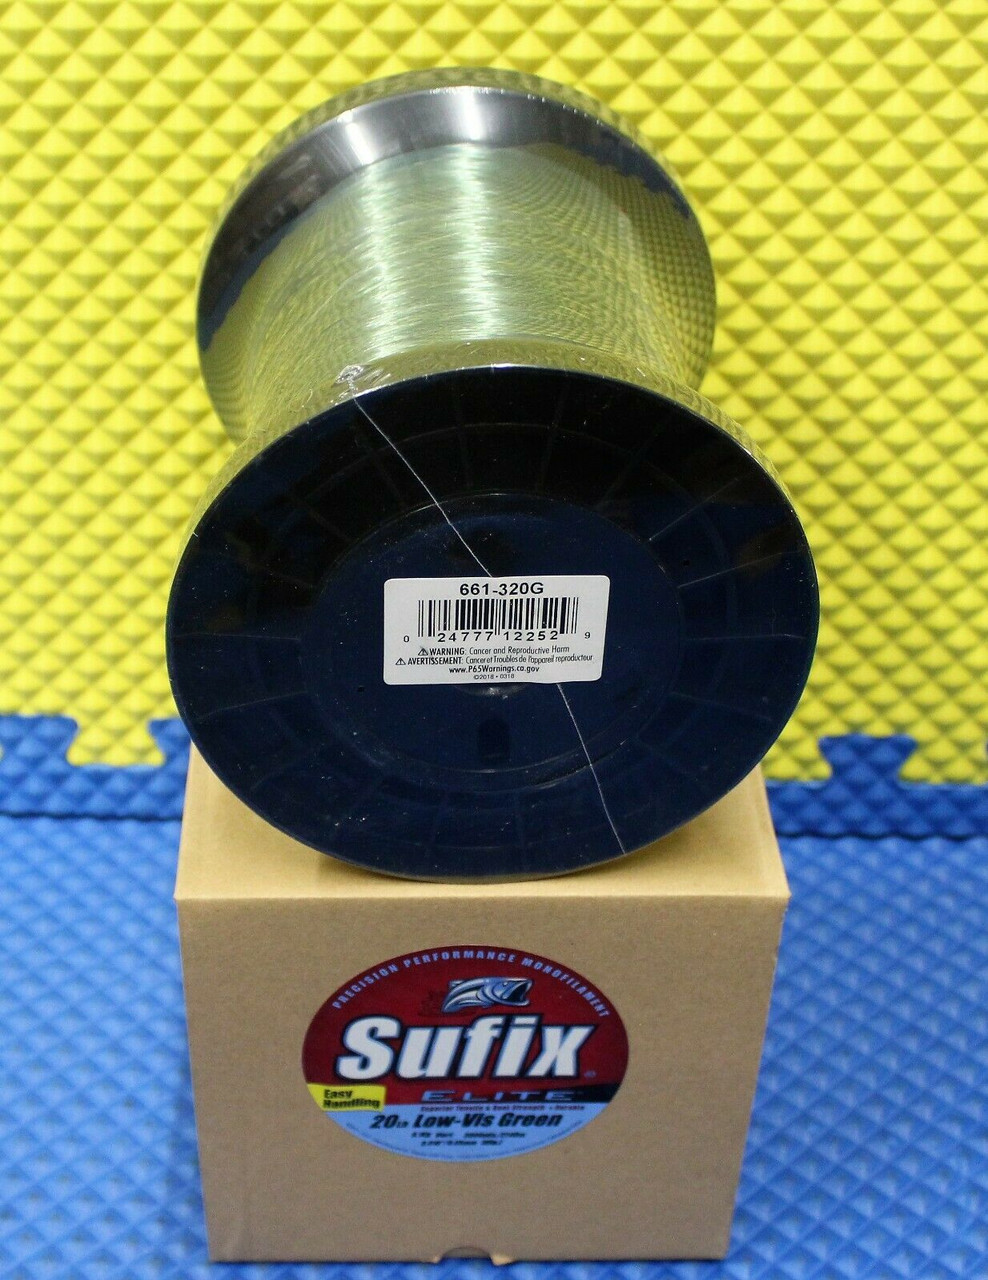 Sufix Elite Low-Vis Green Monofilament Fishing Line 3000 YD Spools CHOOSE  YOUR LINE WEIGHT!